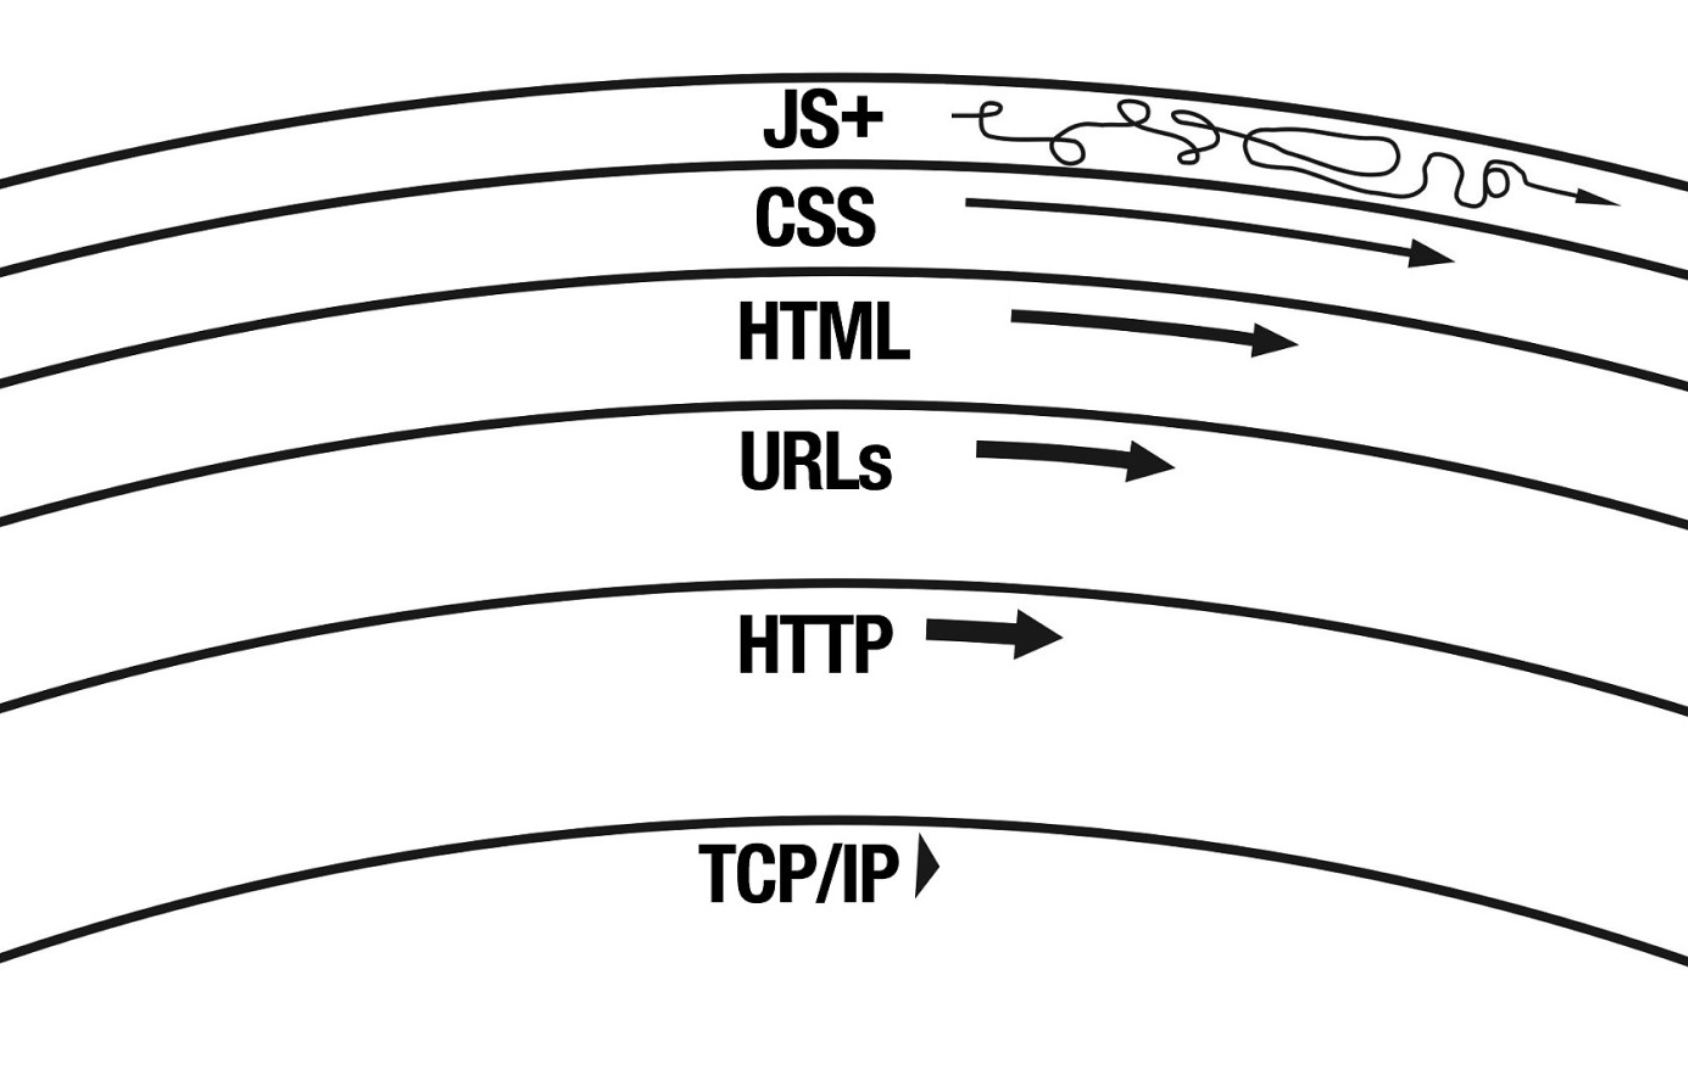 Illustration of the layers that make up the web, with TCIP/IP on the bottom, then HTTP, then URLs, then HTML, then CSS, with JS on top.